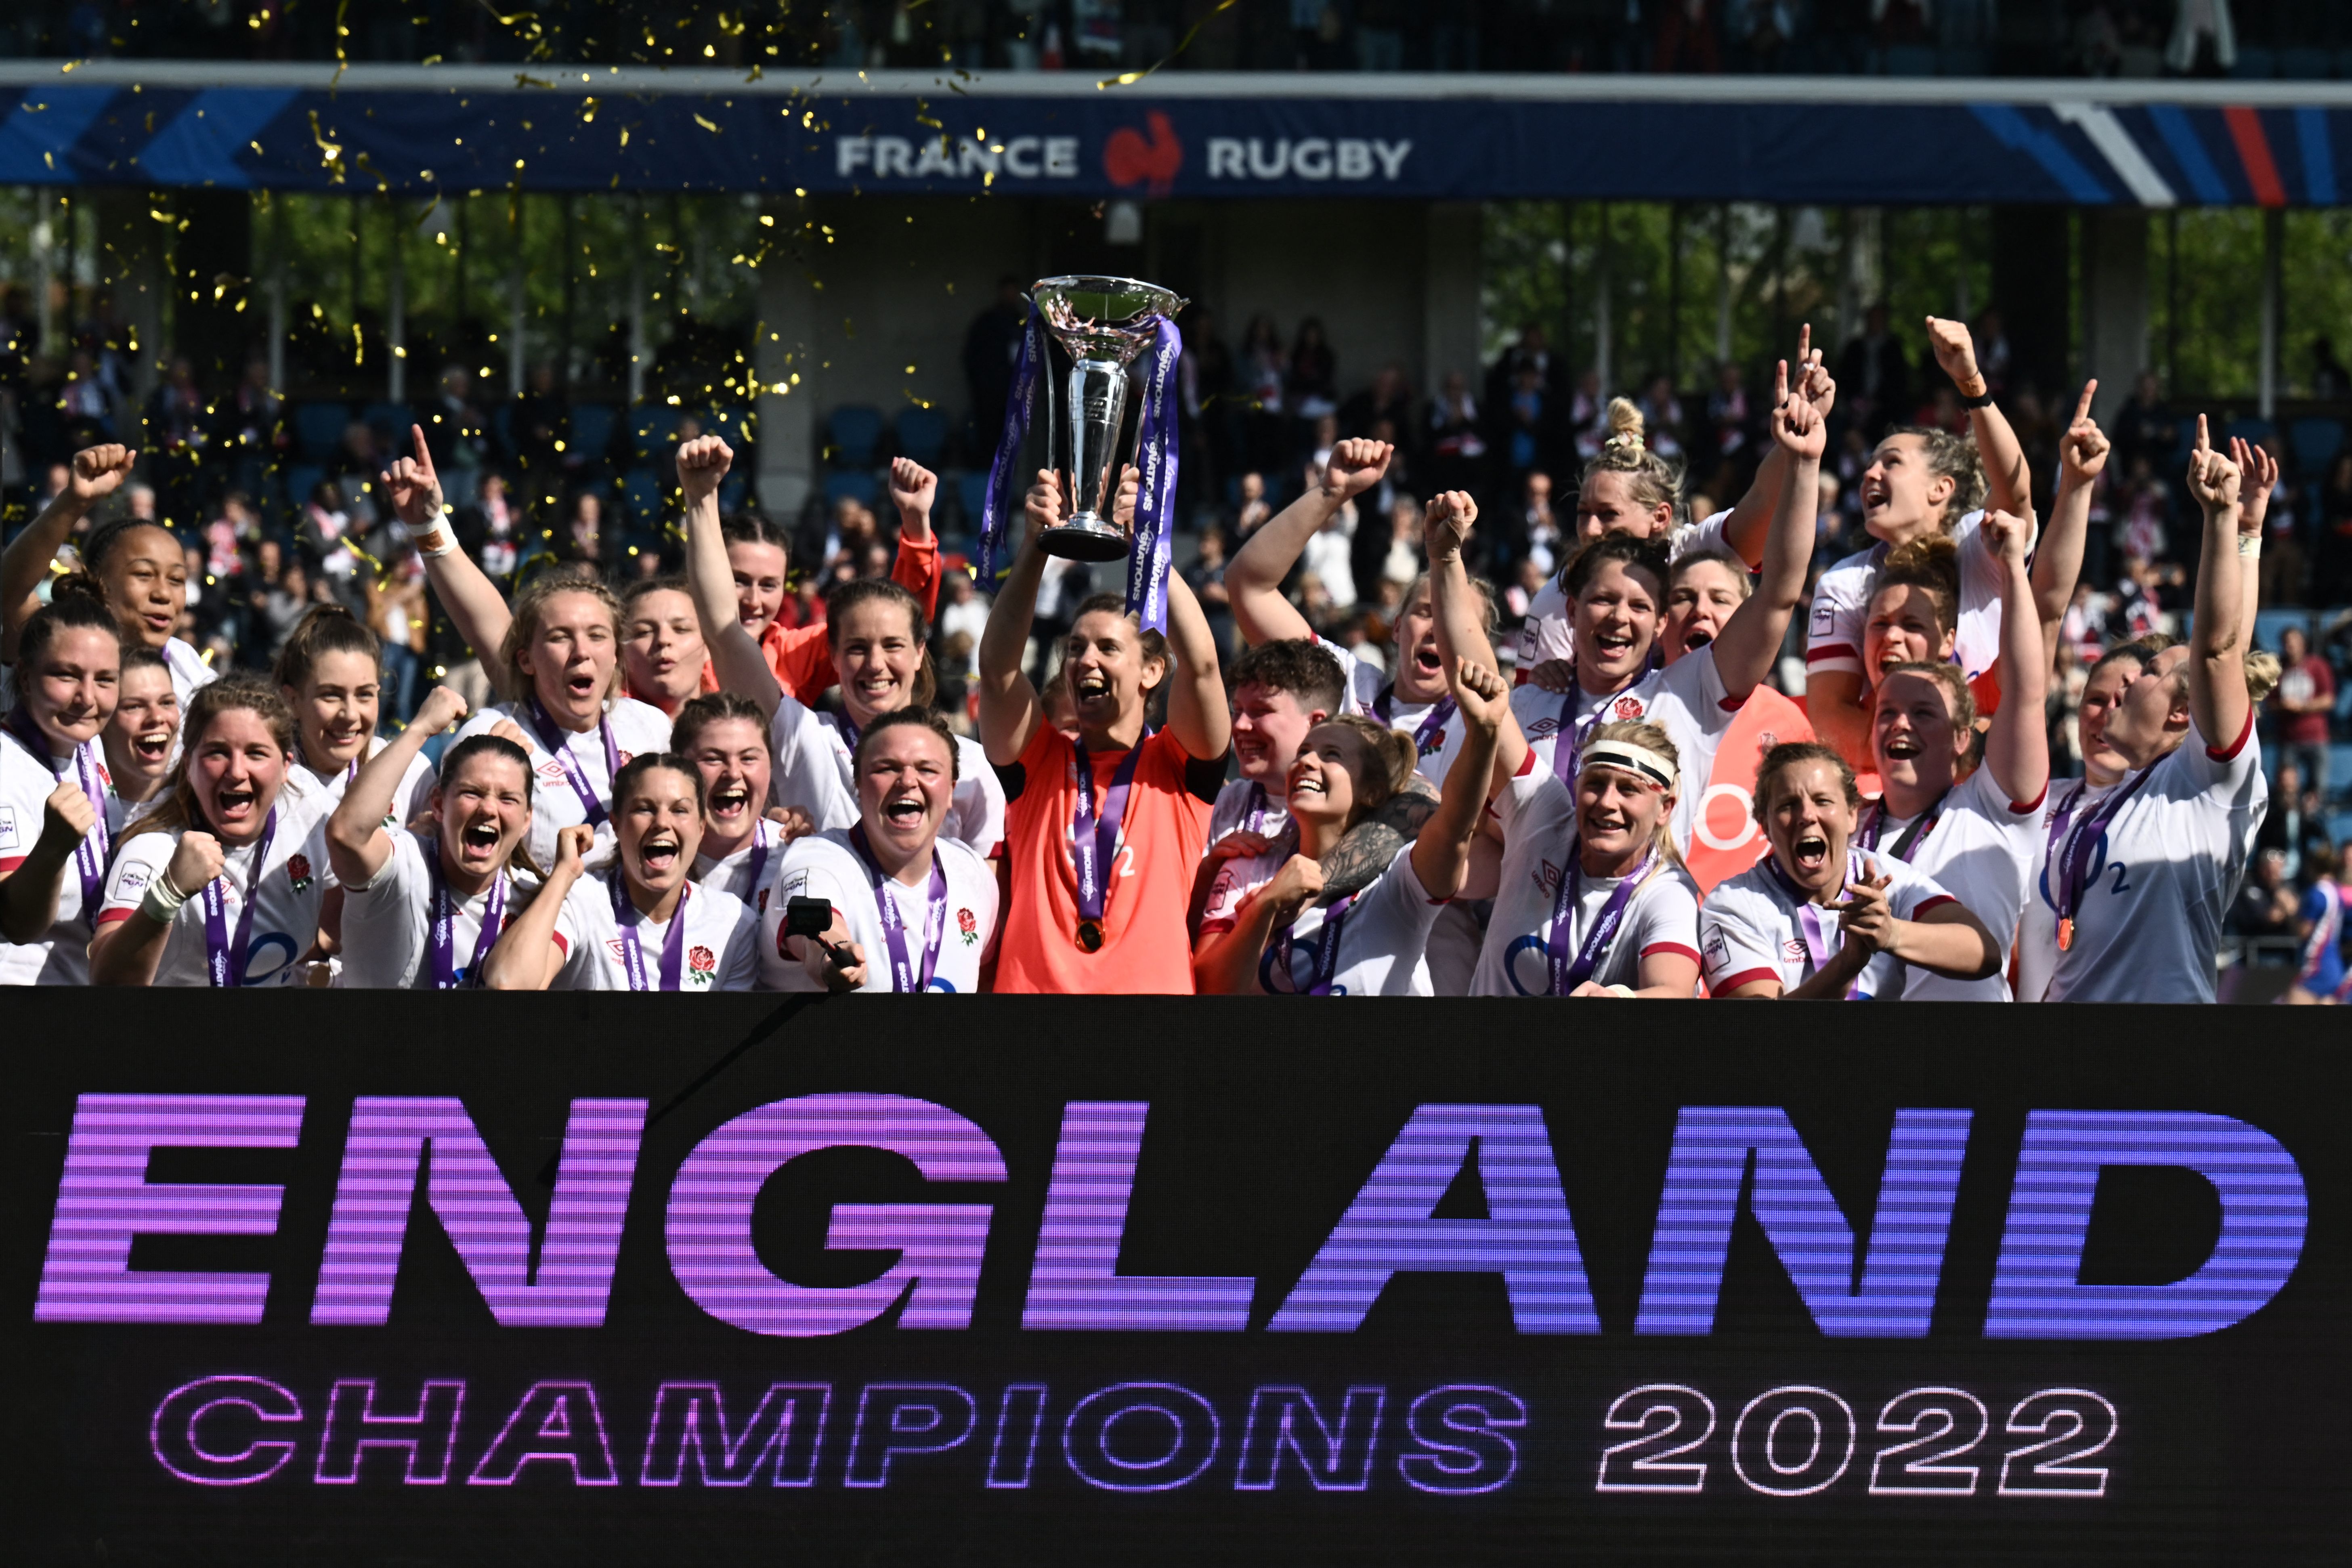 England players lift the trophy in Bayonne